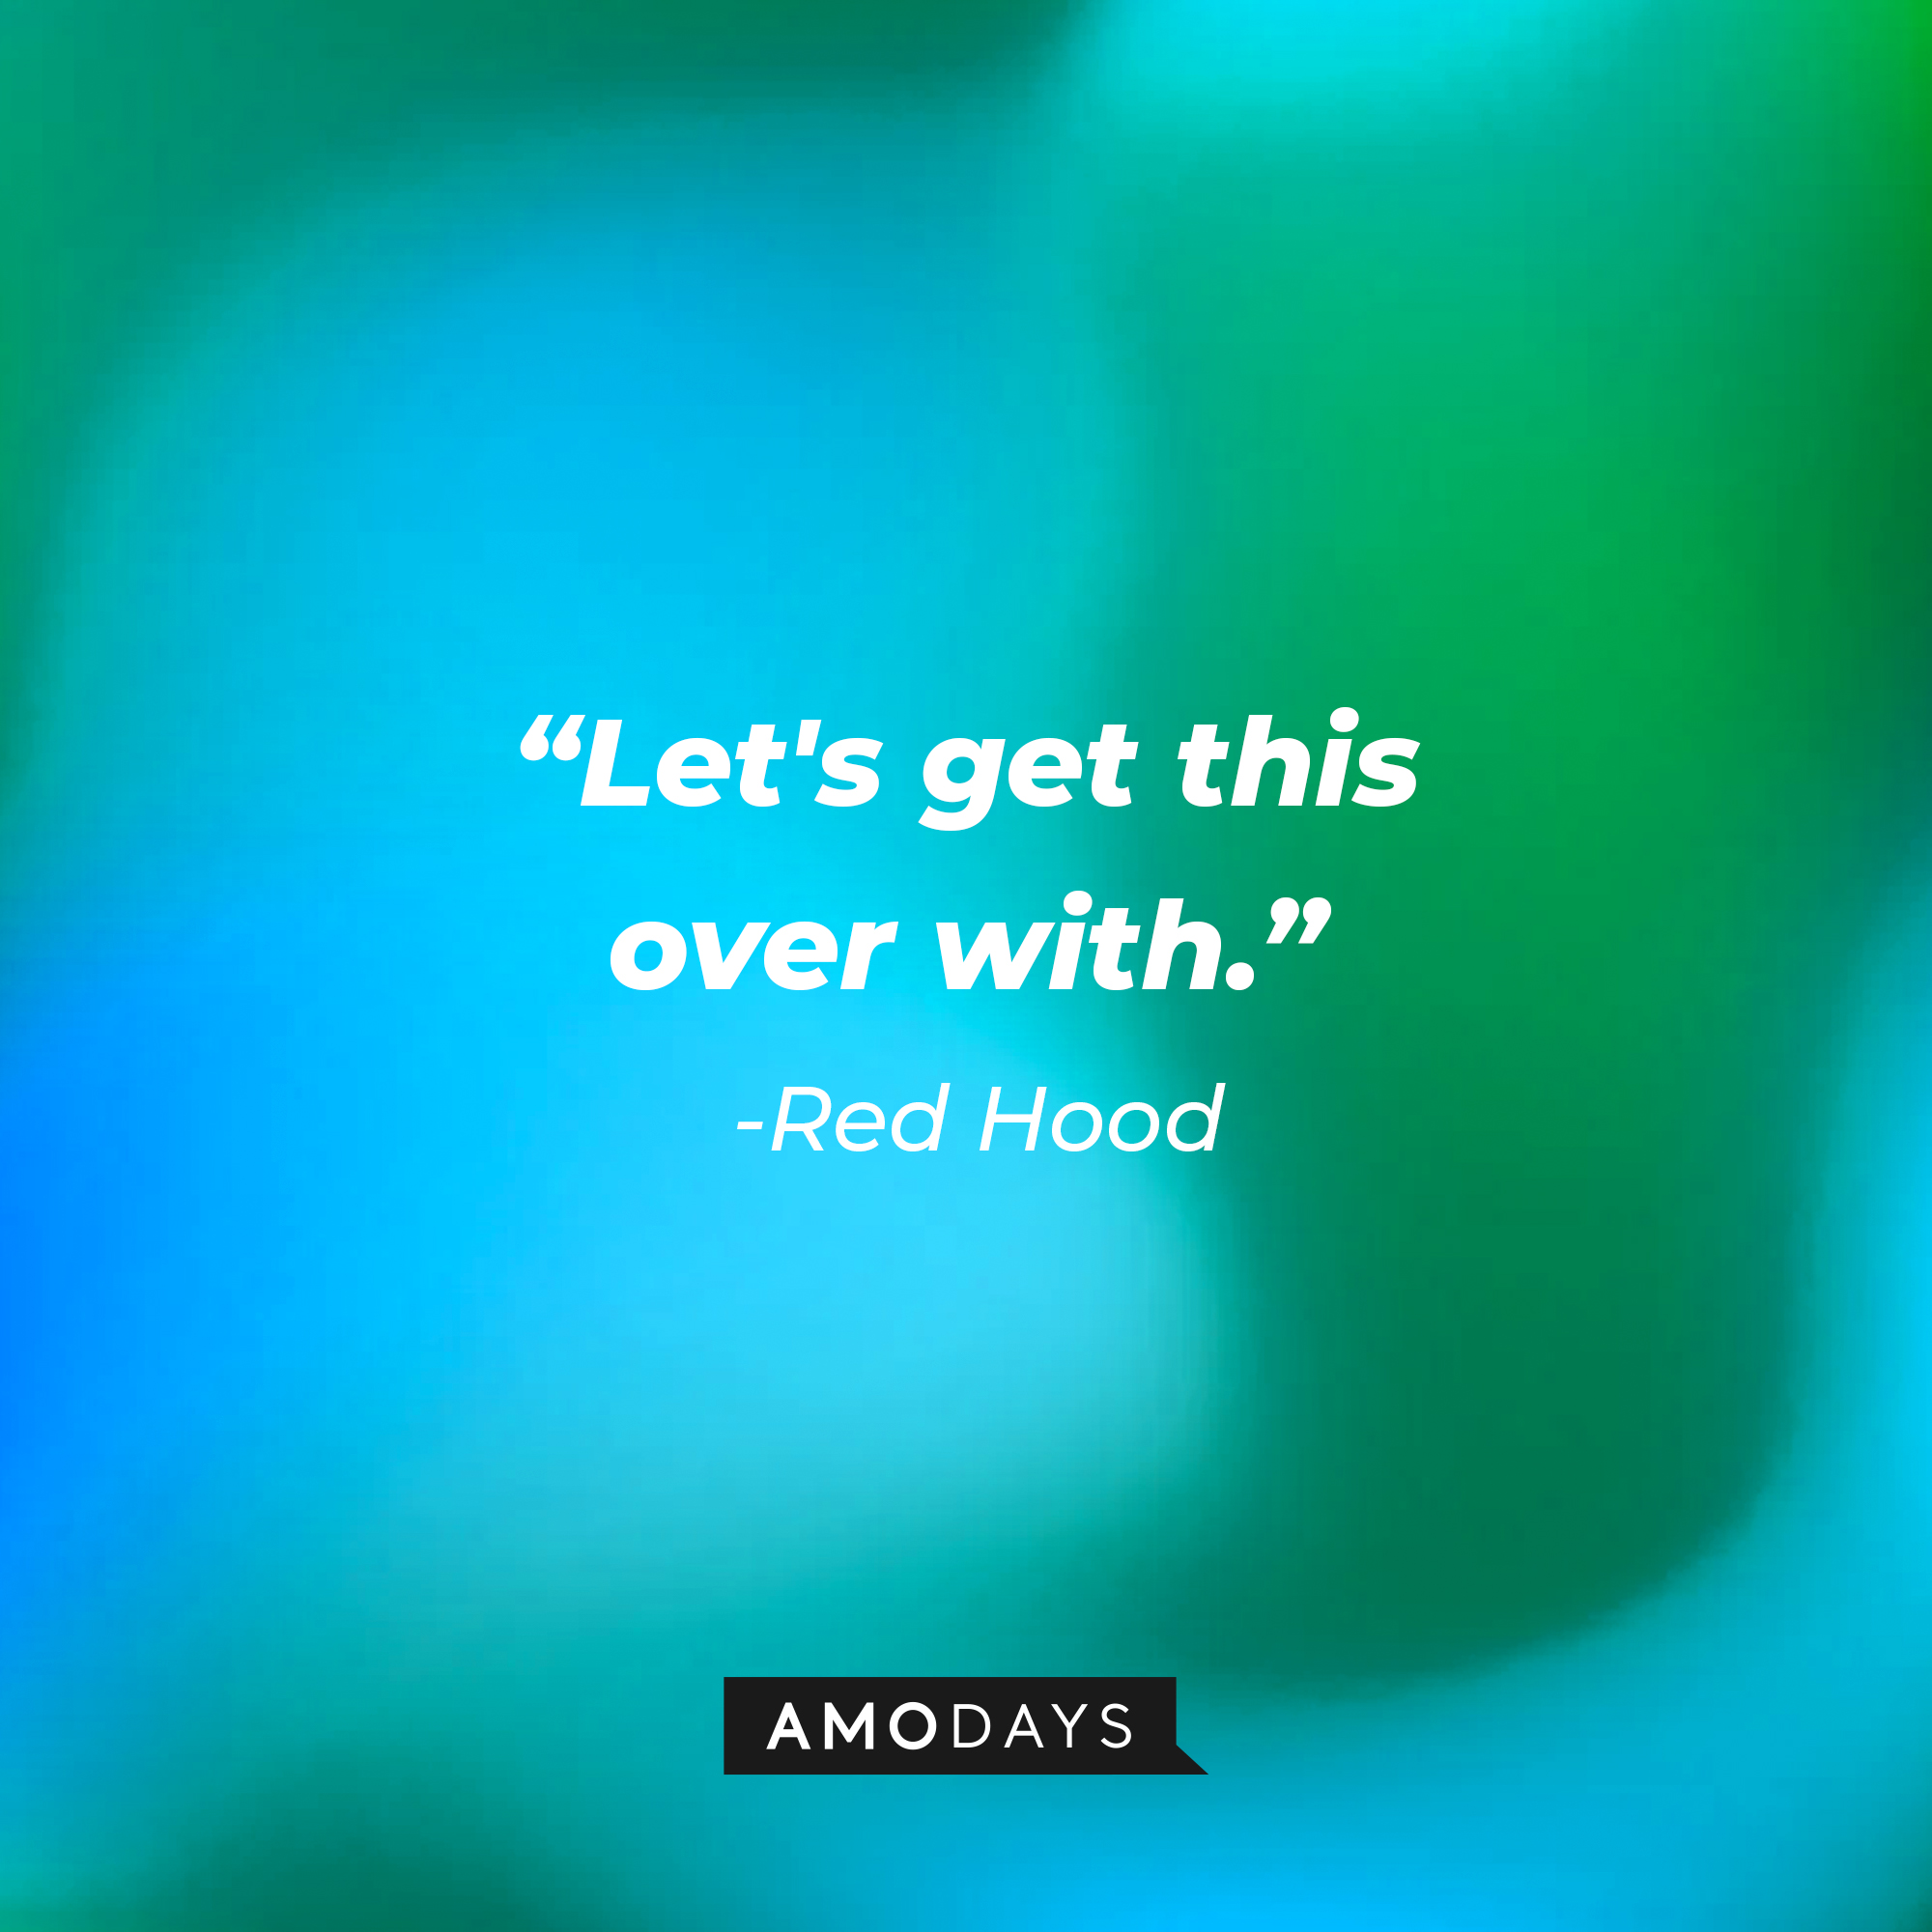 Red Hood’s quote: "Let's get this over with.” | Source: AmoDays